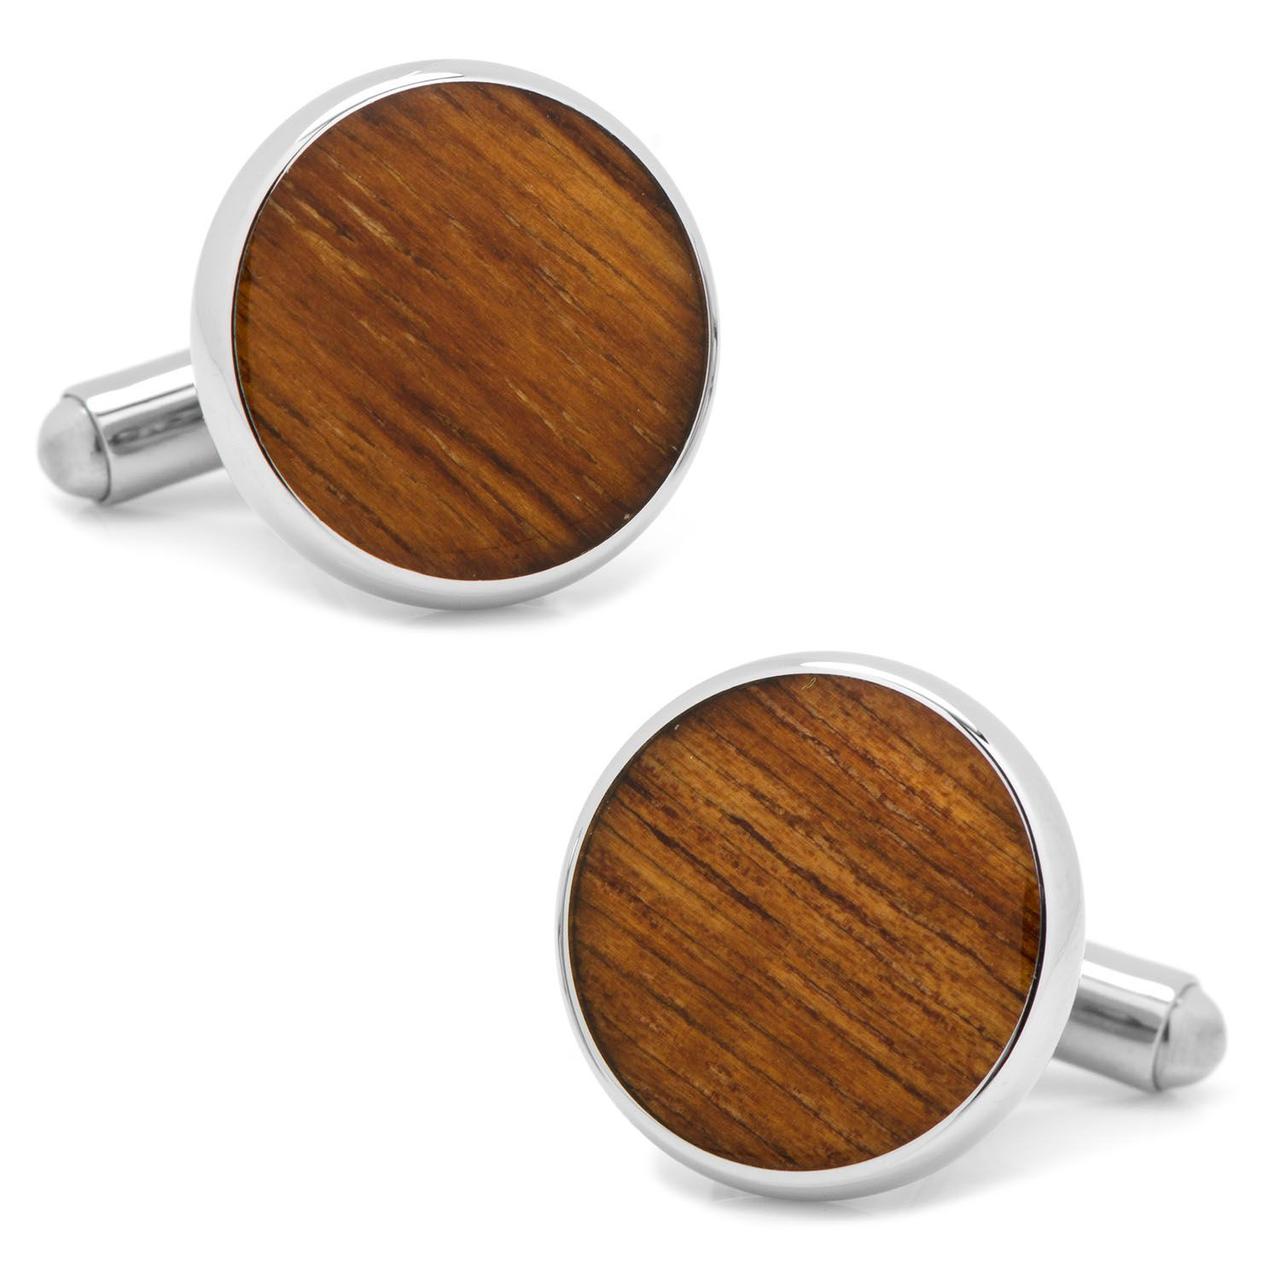 Wooden cuff links traditional 5 year anniversary gift for him 